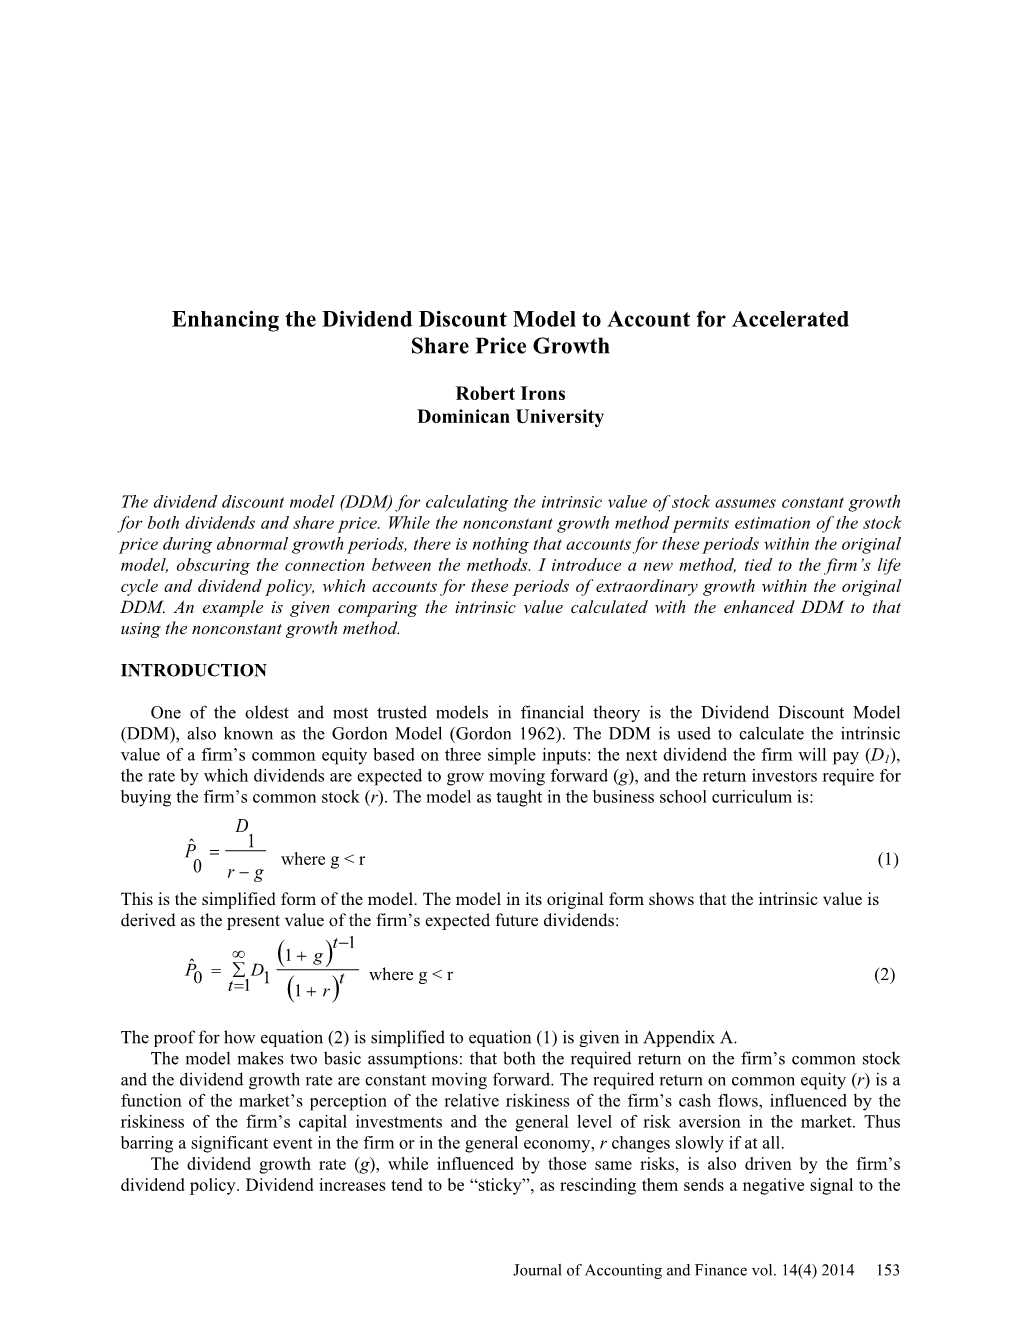 Enhancing the Dividend Discount Model to Account for Accelerated Share Price Growth